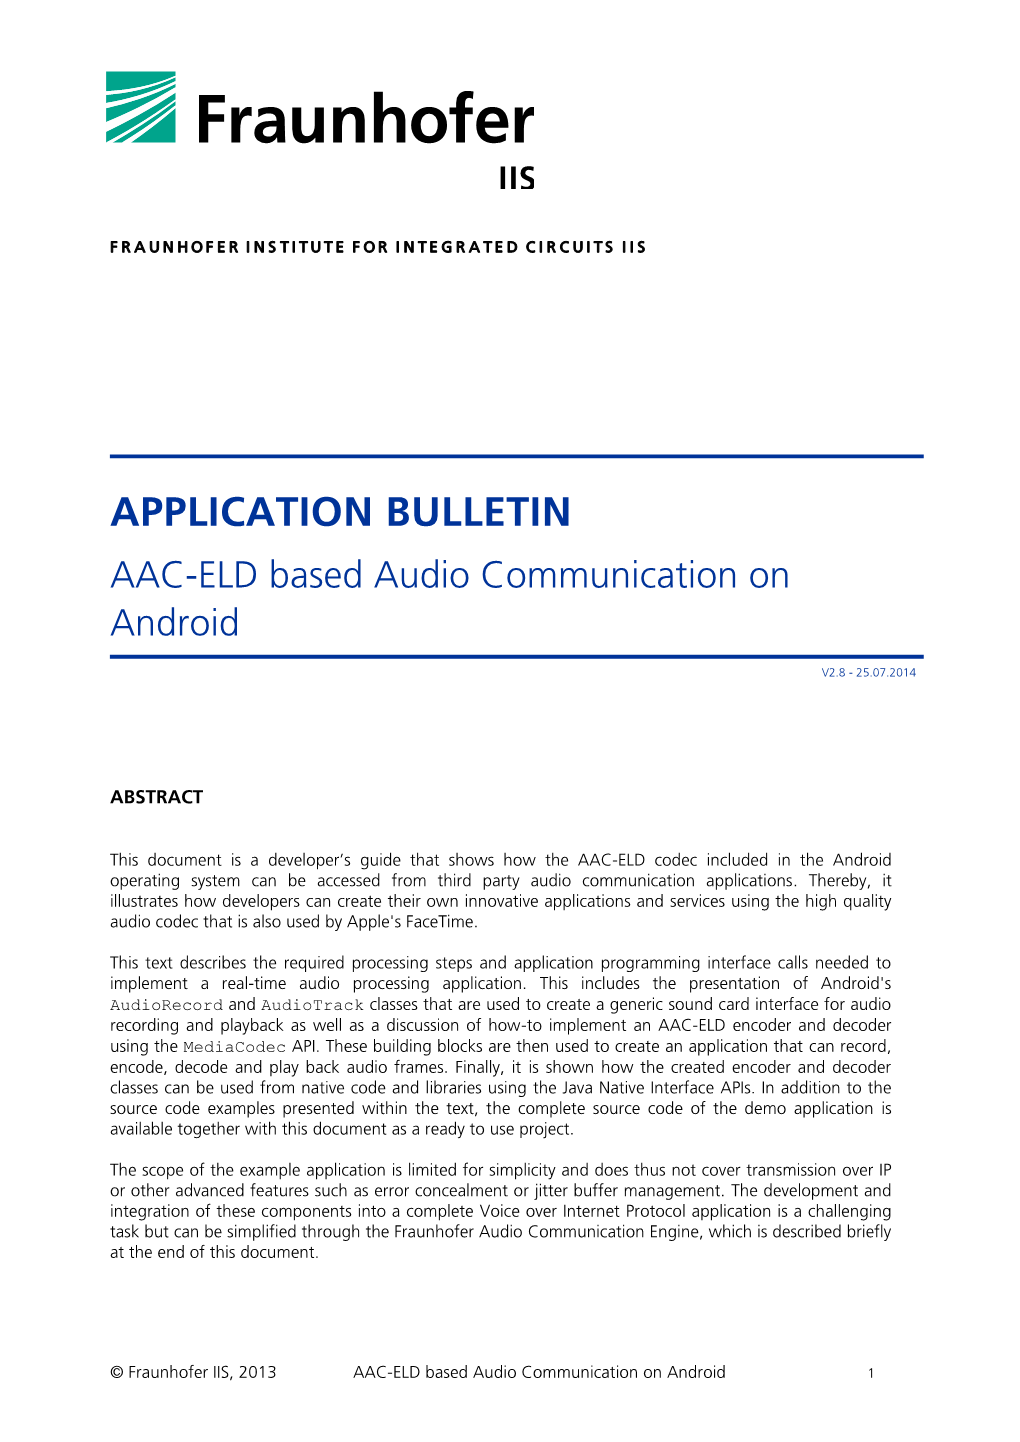 APPLICATION BULLETIN AAC-ELD Based Audio Communication on Android V2.8 - 25.07.2014